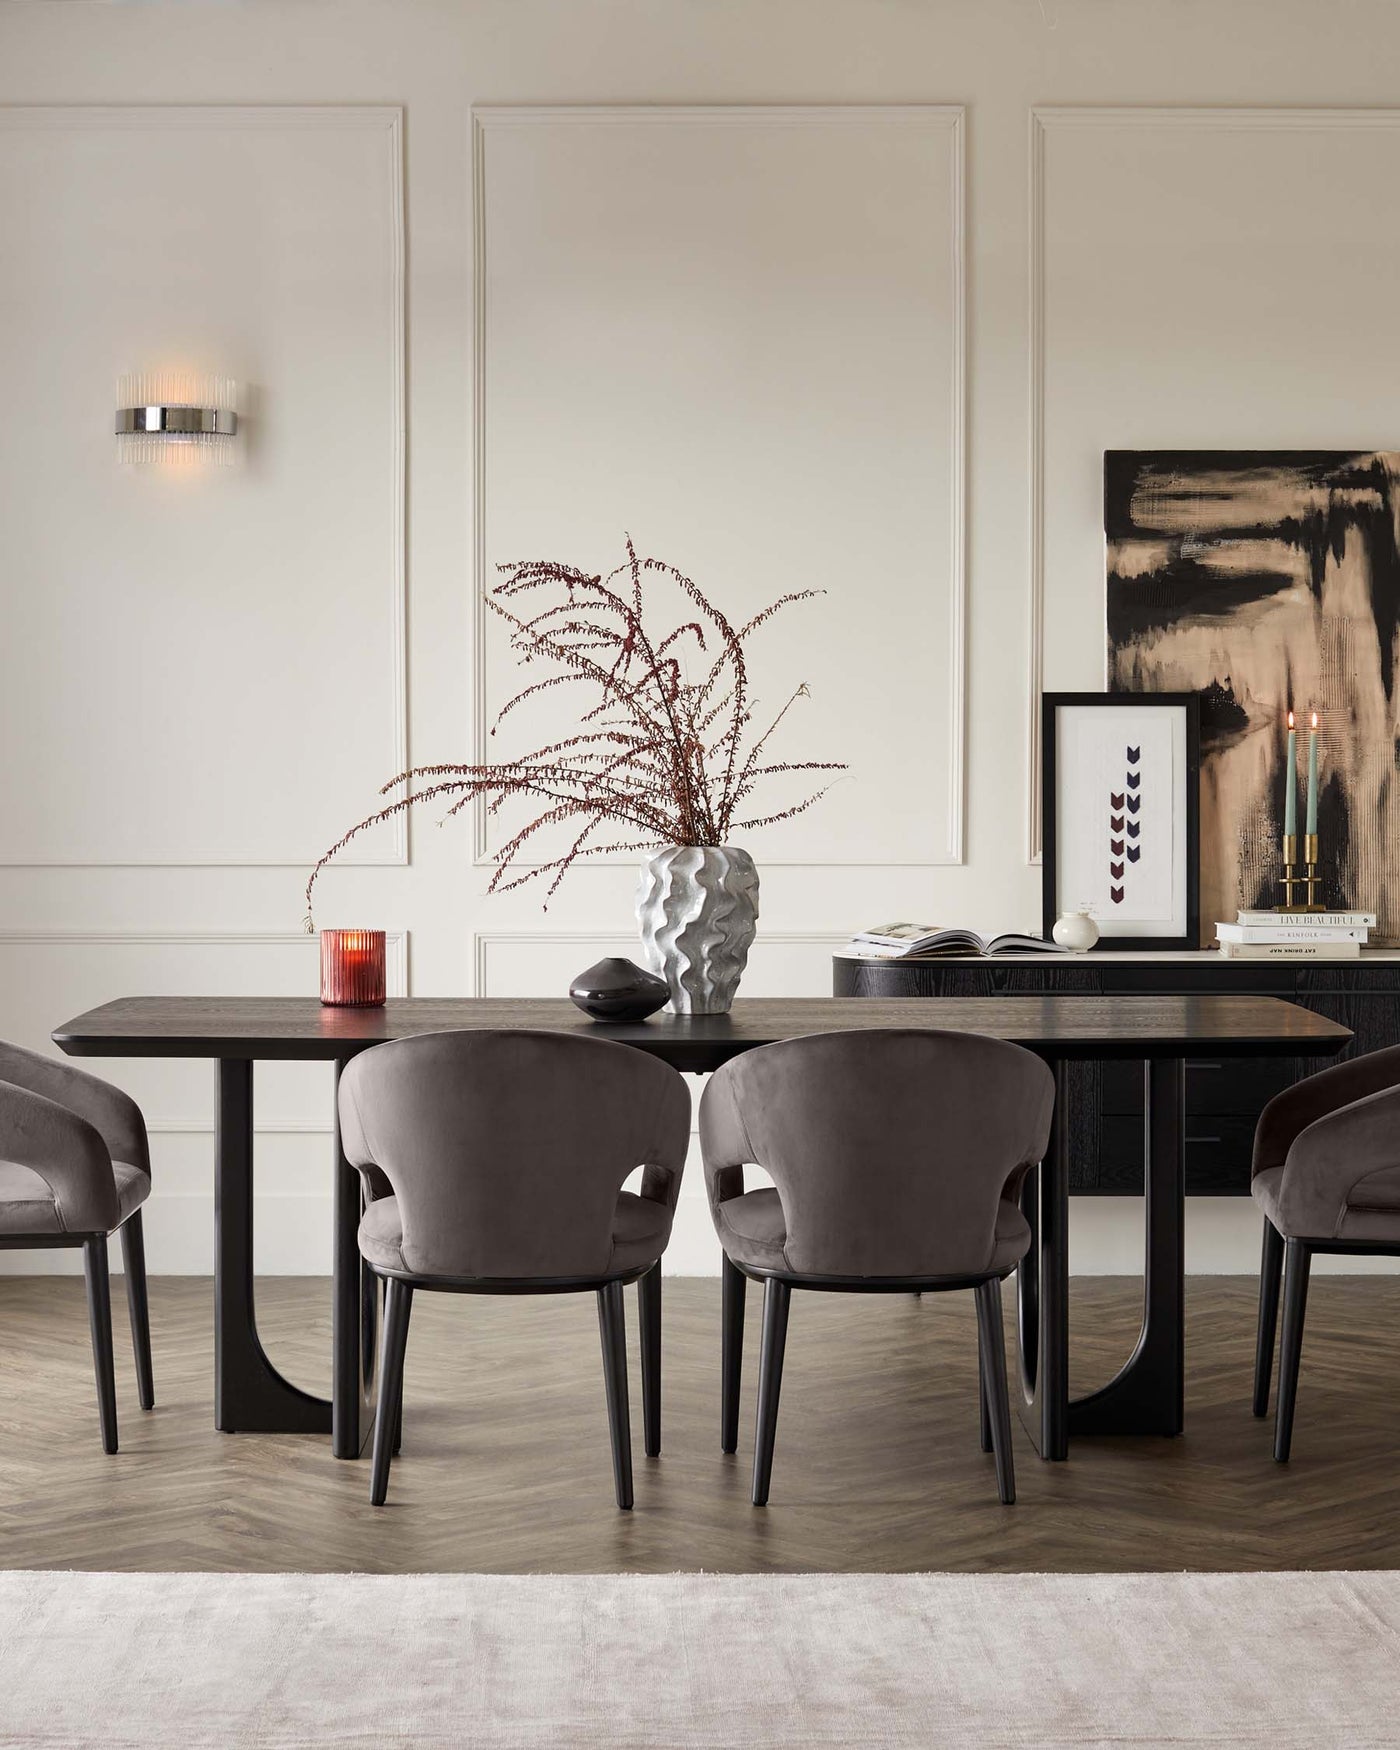 Modern minimalist dining room furniture set with a sleek, dark wood rectangular table and four plush, grey upholstered chairs with black legs, arranged on a subtle off-white area rug, creating a stylish and sophisticated interior.